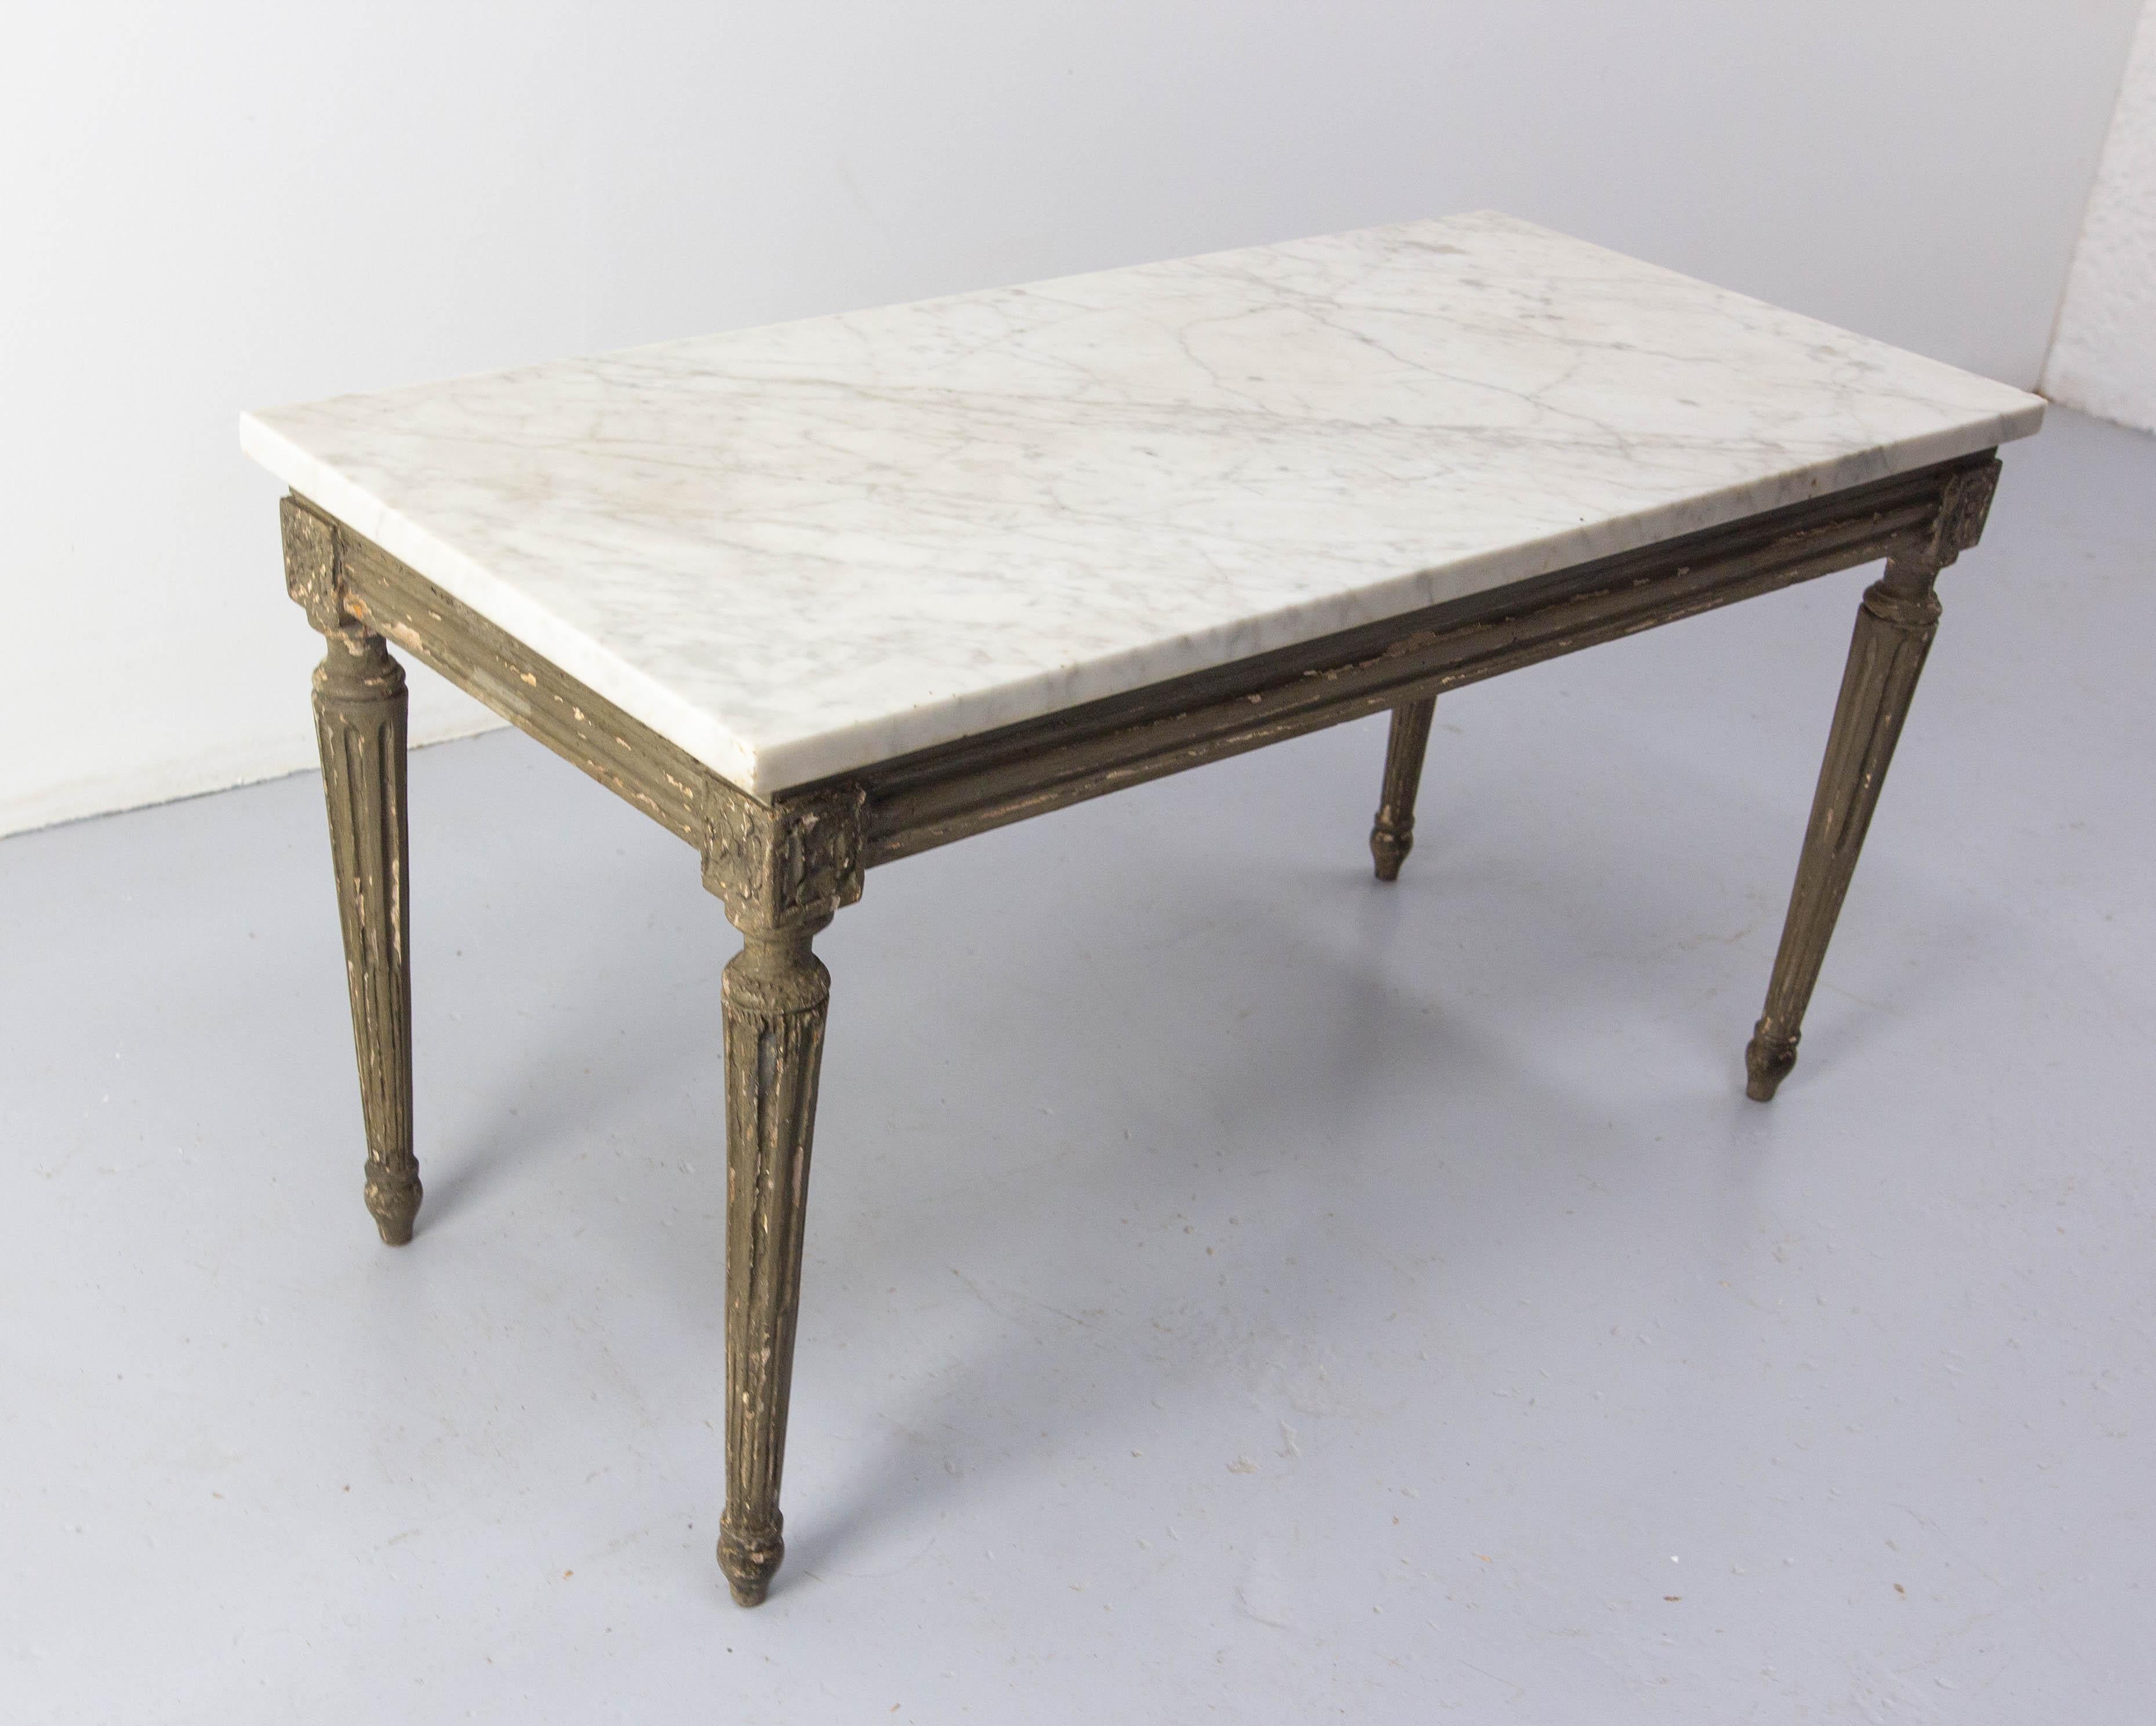 French Marble and wood coffee table.
The wood part of this table is made of a 19th century bench which was covered of a caned part.
With a beautiful marble plaque, this former bench has become a unique coffee table full of character.
In good